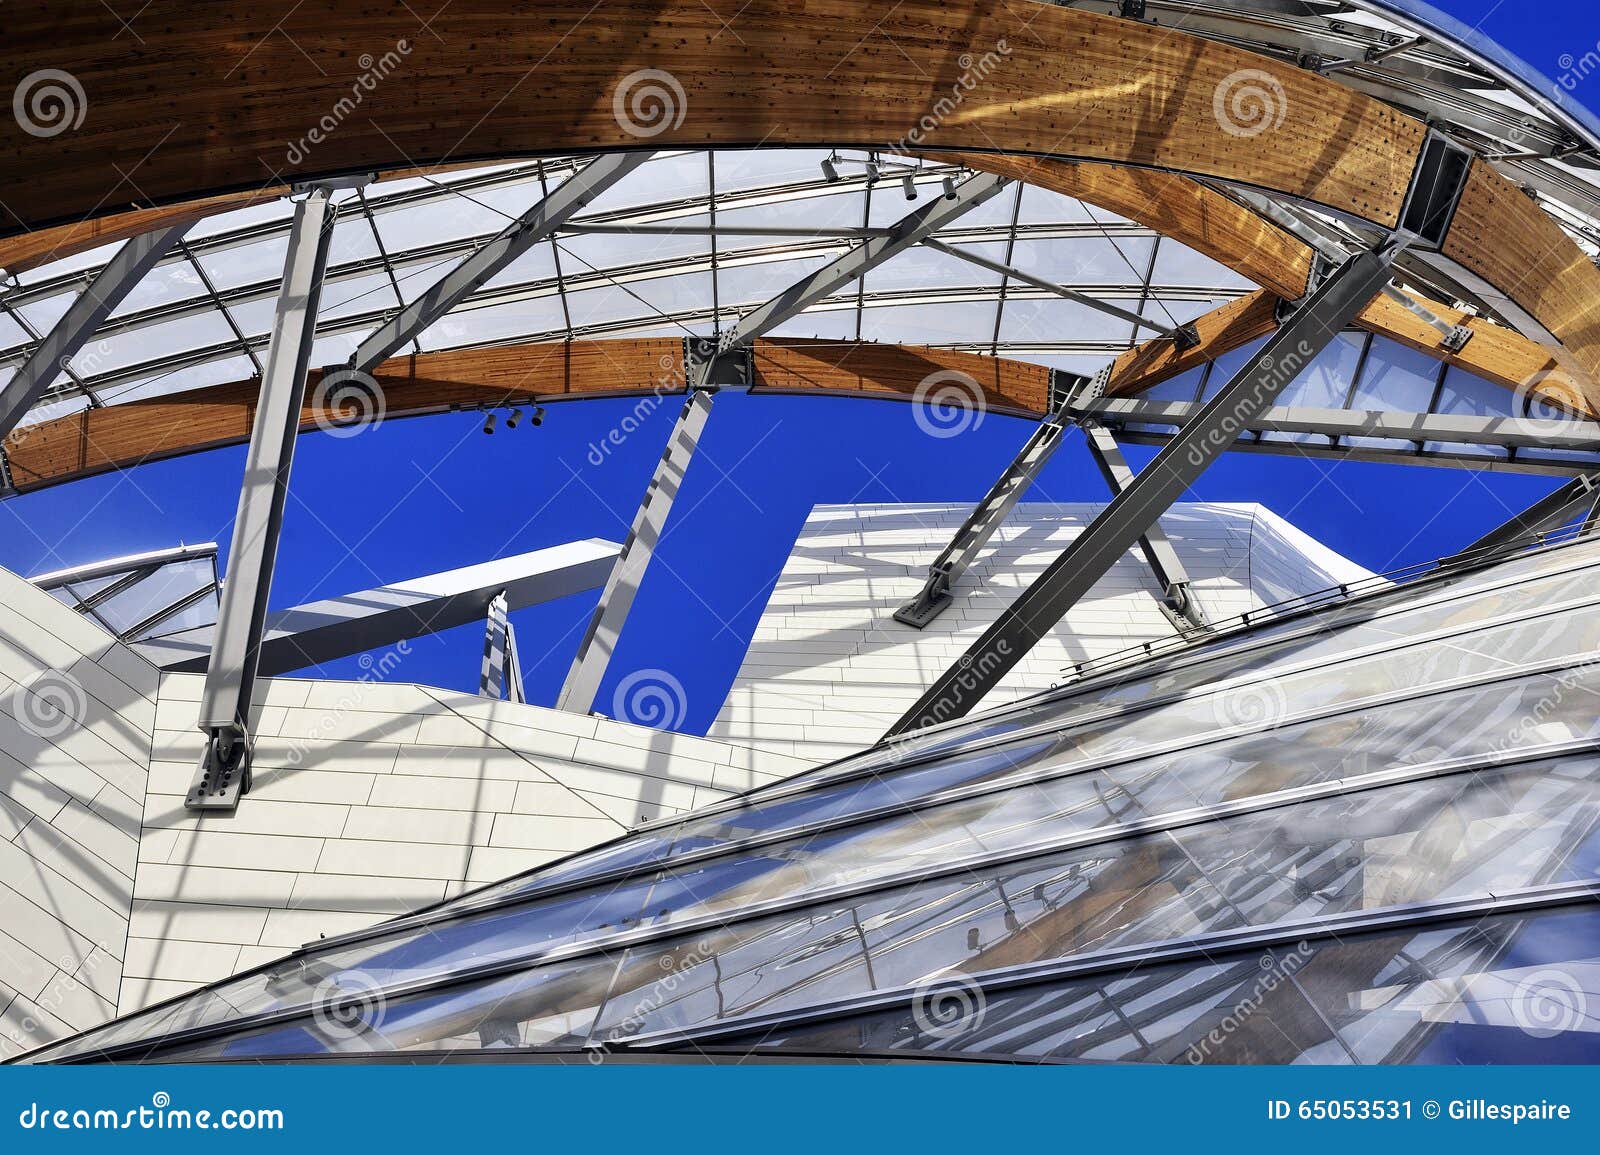 Museum Of Contemporary Art Of The Louis Vuitton Foundation Editorial Photo - Image of modern ...